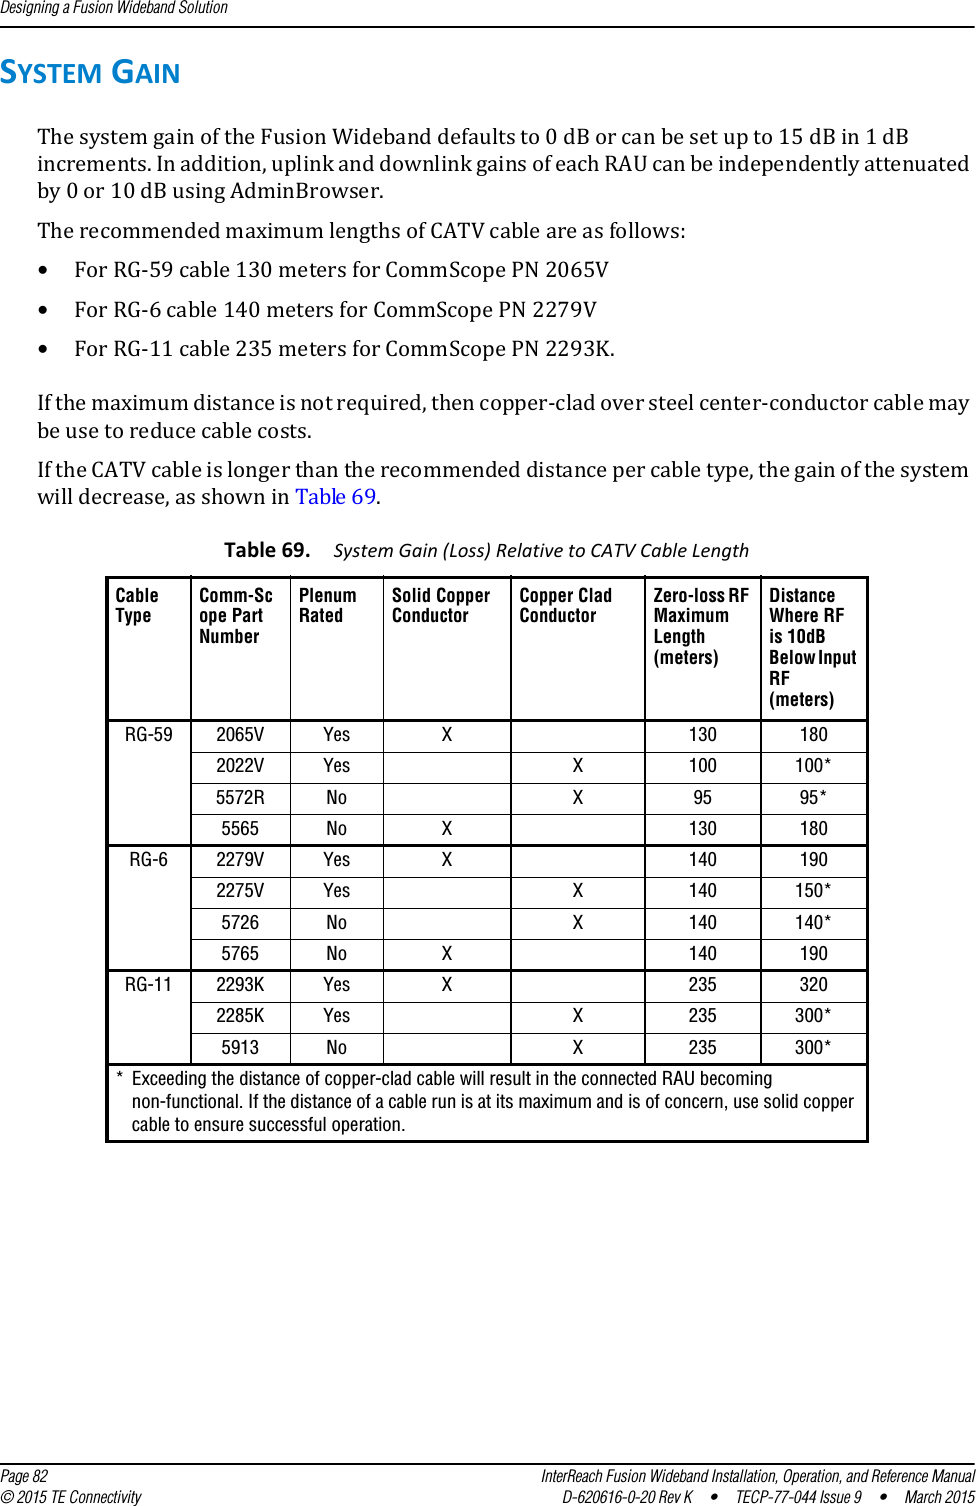 Designing a Fusion Wideband Solution  Page 82 InterReach Fusion Wideband Installation, Operation, and Reference Manual© 2015 TE Connectivity D-620616-0-20 Rev K  •  TECP-77-044 Issue 9  •  March 2015SYSTEM GAINThe system gain of the Fusion Wideband defaults to 0 dB or can be set up to 15 dB in 1 dB increments. In addition, uplink and downlink gains of each RAU can be independently attenuated by 0 or 10 dB using AdminBrowser. The recommended maximum lengths of CATV cable are as follows:•For RG-59 cable 130 meters for CommScope PN 2065V•For RG-6 cable 140 meters for CommScope PN 2279V•For RG-11 cable 235 meters for CommScope PN 2293K.If the maximum distance is not required, then copper-clad over steel center-conductor cable may be use to reduce cable costs.If the CATV cable is longer than the recommended distance per cable type, the gain of the system will decrease, as shown in Table 69.Table 69. System Gain (Loss) Relative to CATV Cable Length Cable TypeComm-Scope Part NumberPlenum RatedSolid Copper ConductorCopper Clad ConductorZero-loss RF Maximum Length (meters)Distance Where RF is 10dB Below Input RF (meters)RG-59 2065V Yes X 130 1802022V Yes X 100 100*5572R No X 95 95*5565 No X 130 180RG-6 2279V Yes X 140 1902275V Yes X 140 150*5726 No X 140 140*5765 No X 140 190RG-11 2293K Yes X 235 3202285K Yes X 235 300*5913 No X 235 300** Exceeding the distance of copper-clad cable will result in the connected RAU becoming non-functional. If the distance of a cable run is at its maximum and is of concern, use solid copper cable to ensure successful operation.